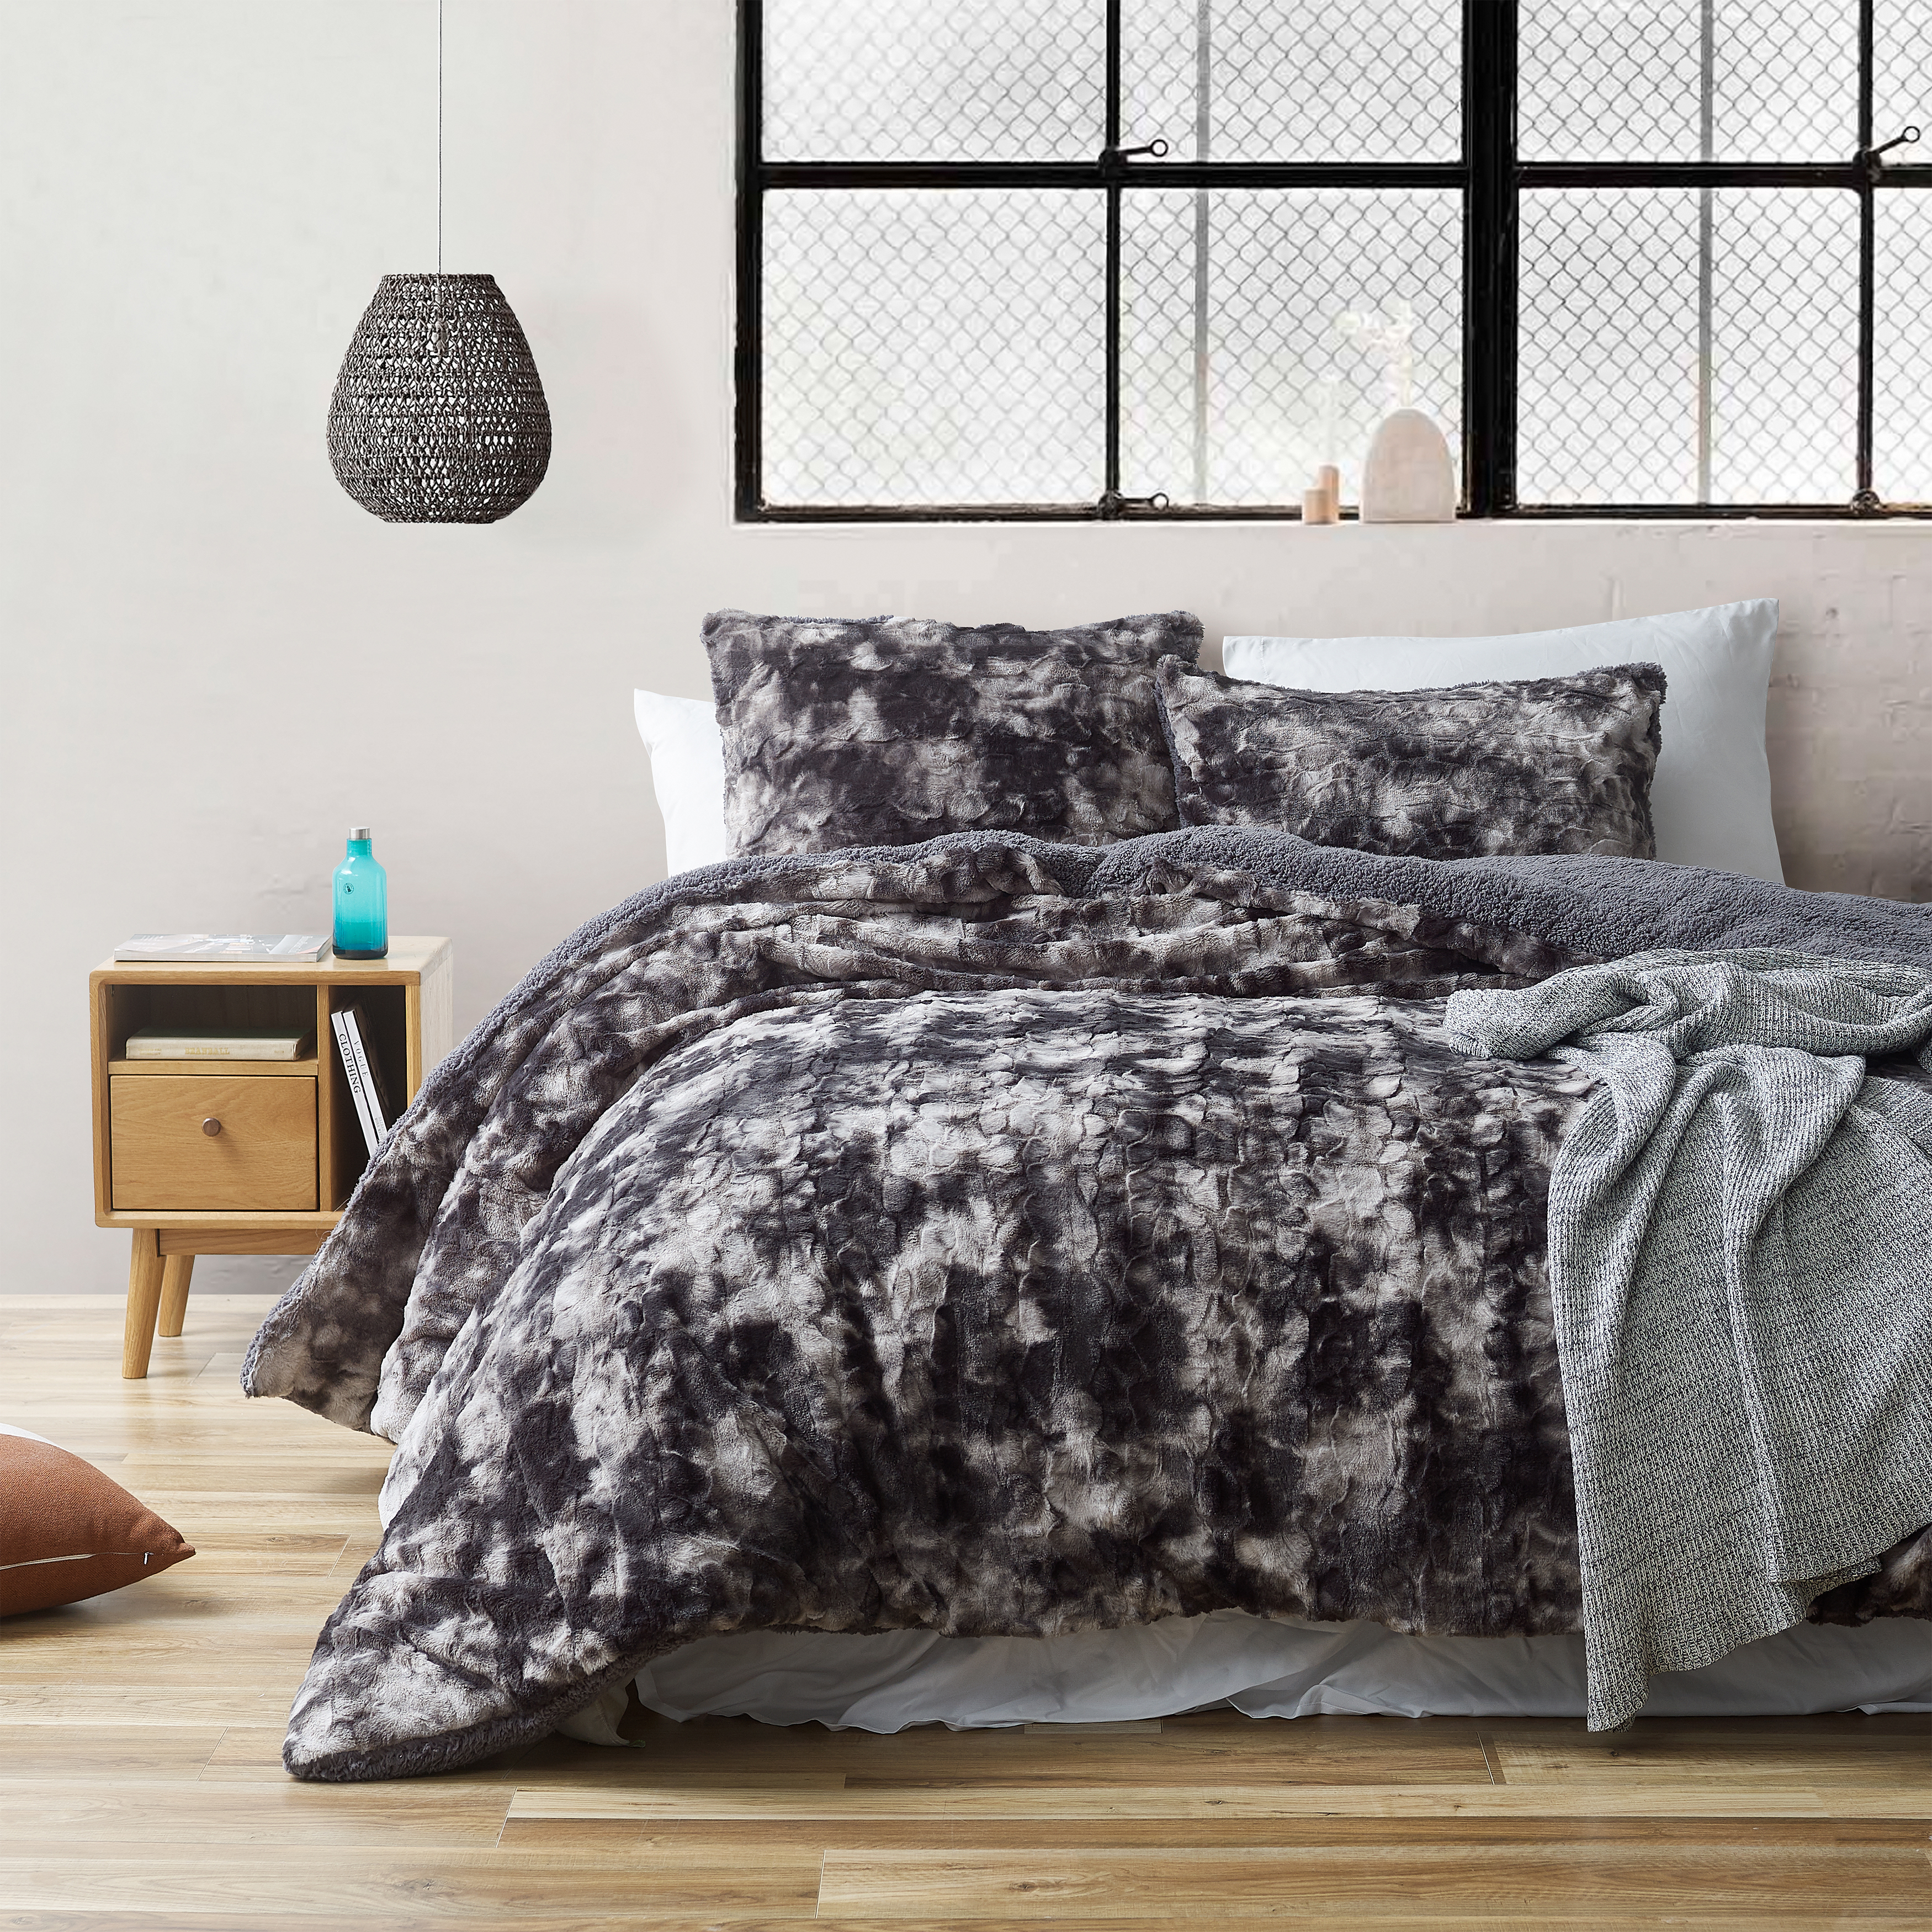 Midnight Snowfall - Coma Inducer Oversized Comforter - Black and White